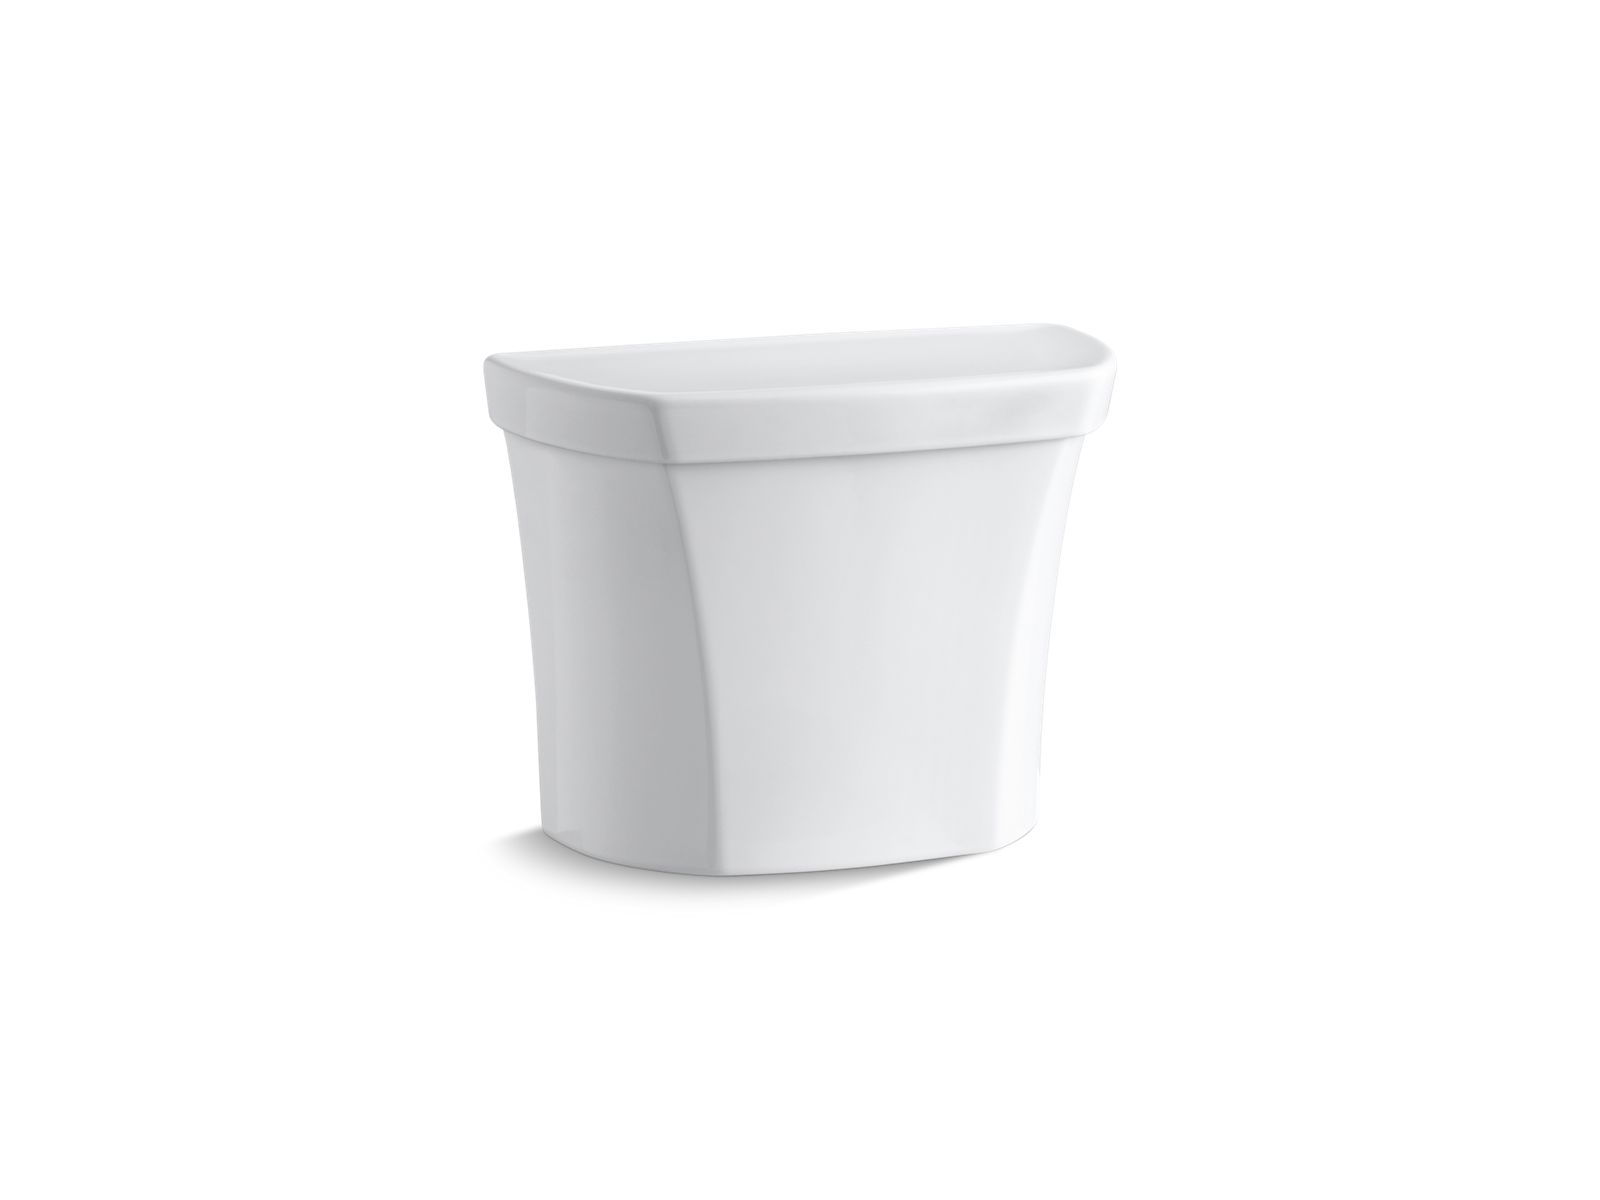 Kohler Co., Toilet Tanks, This Wellworth dual-flush toilet tank combines water savings with powerful flush performance. An